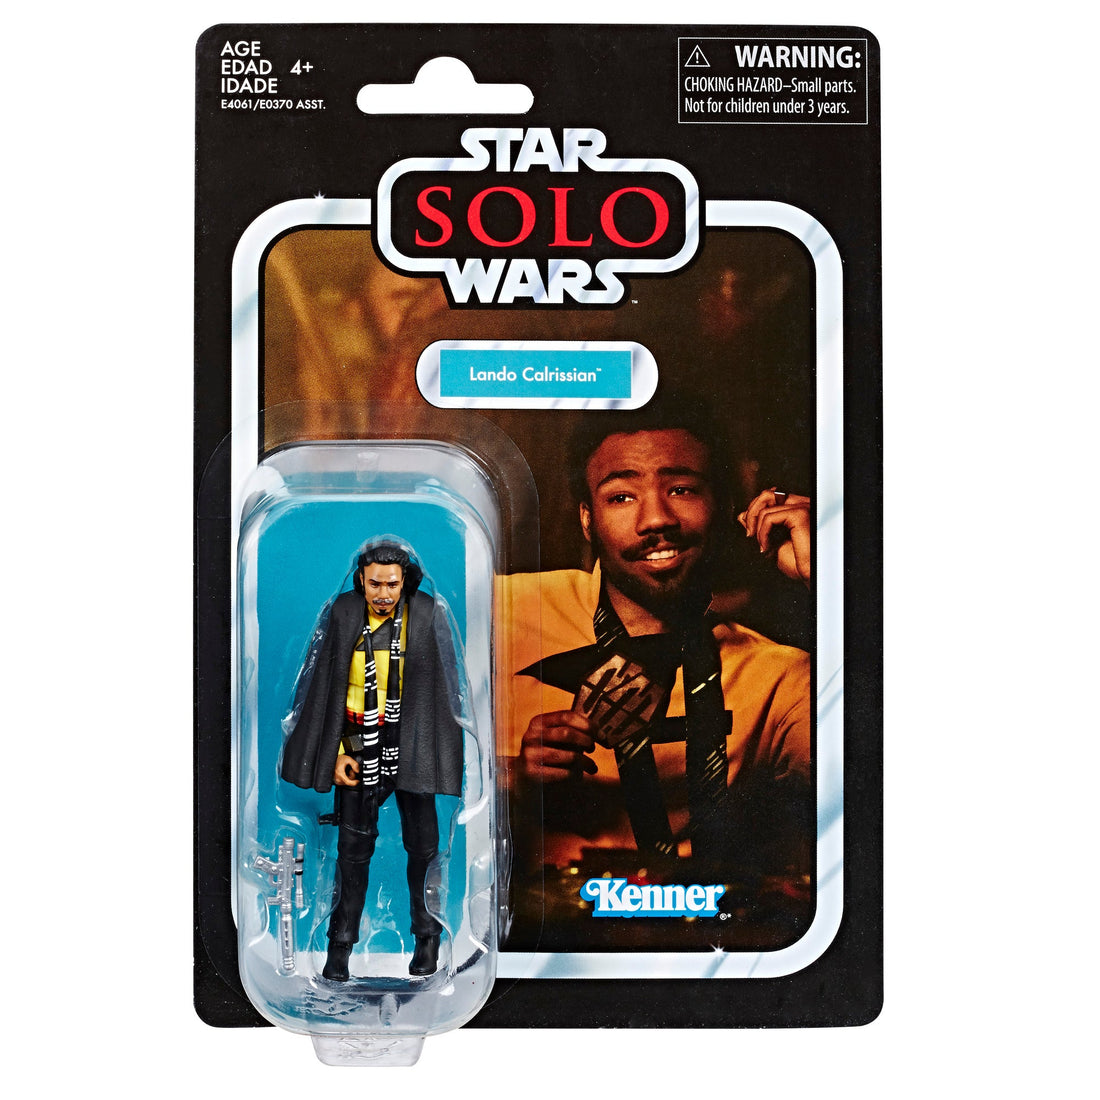 Star Wars The Vintage Collection Solo: A Star Wars Story Lando Calrissian Figure